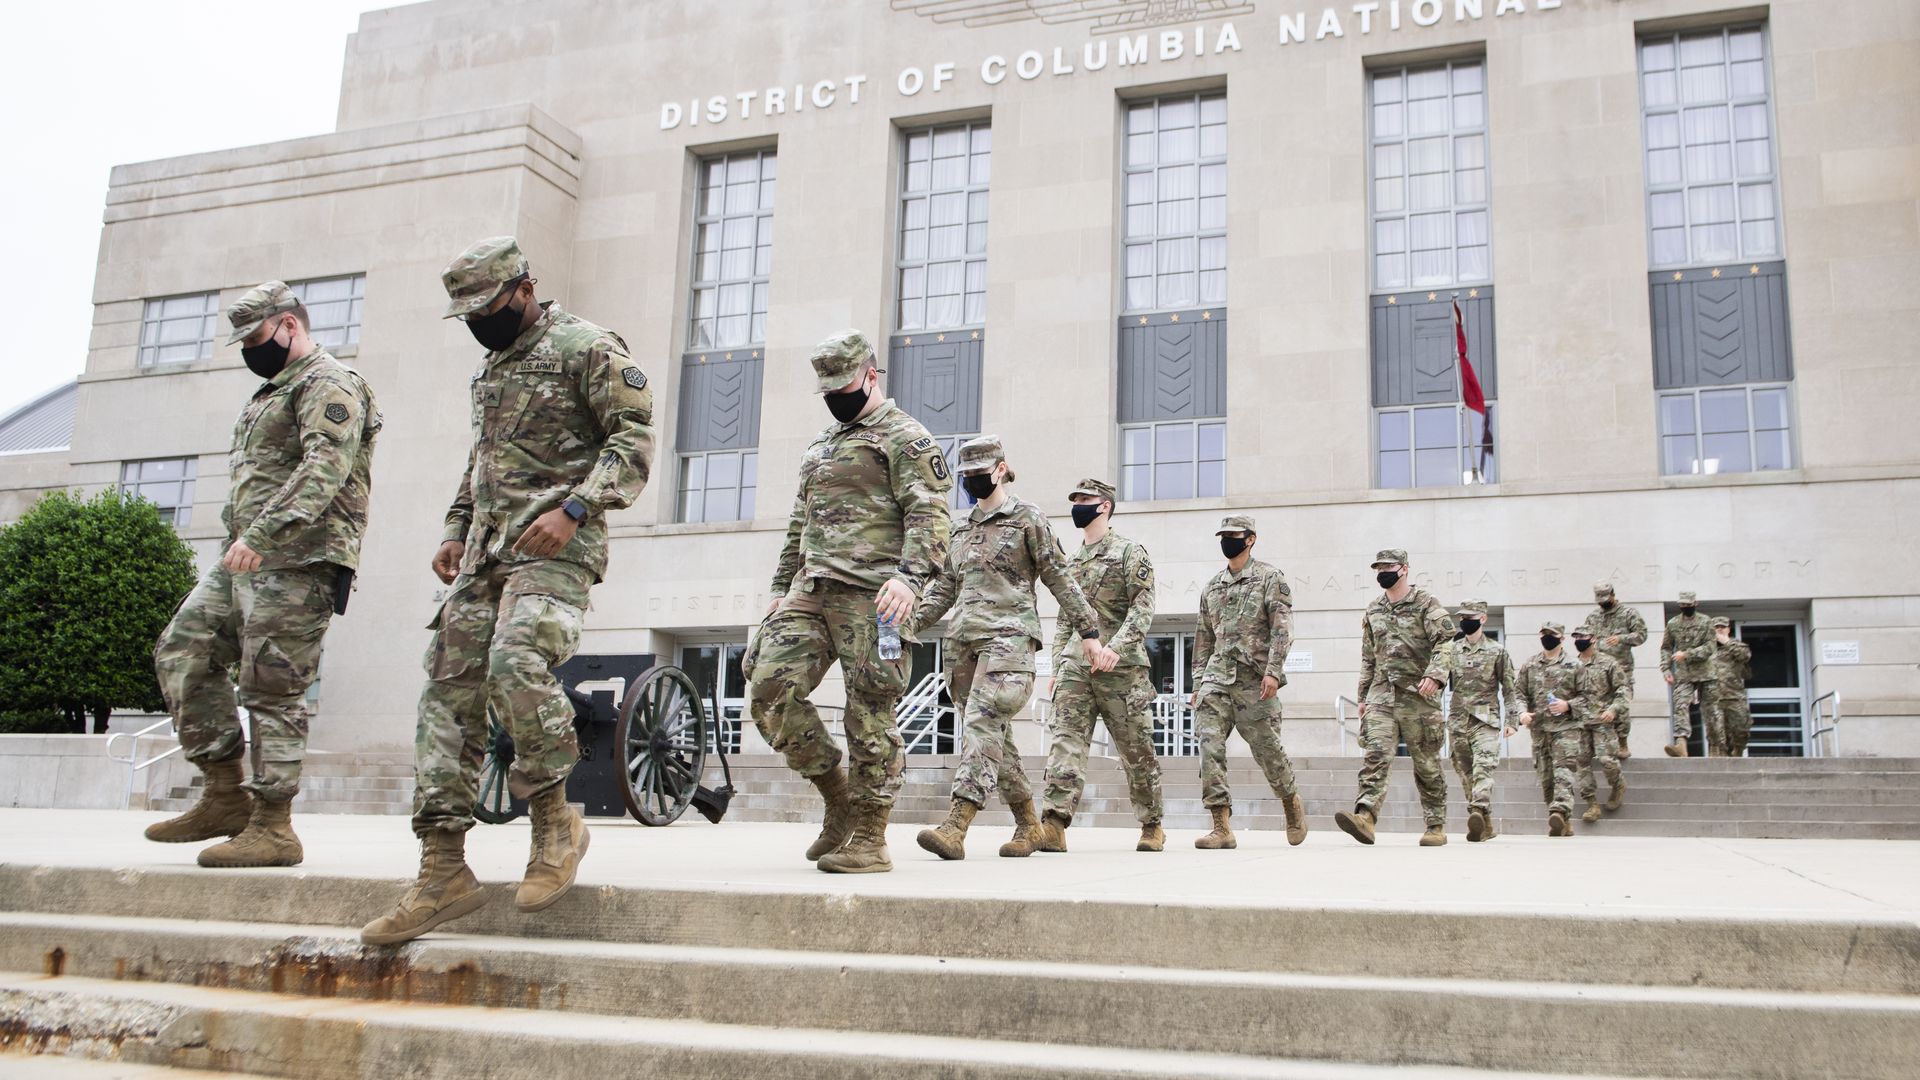 National Guard troops make their way to buses outside the D.C. Armory after ending their mission in Washington on Monday, May 24, 2021.